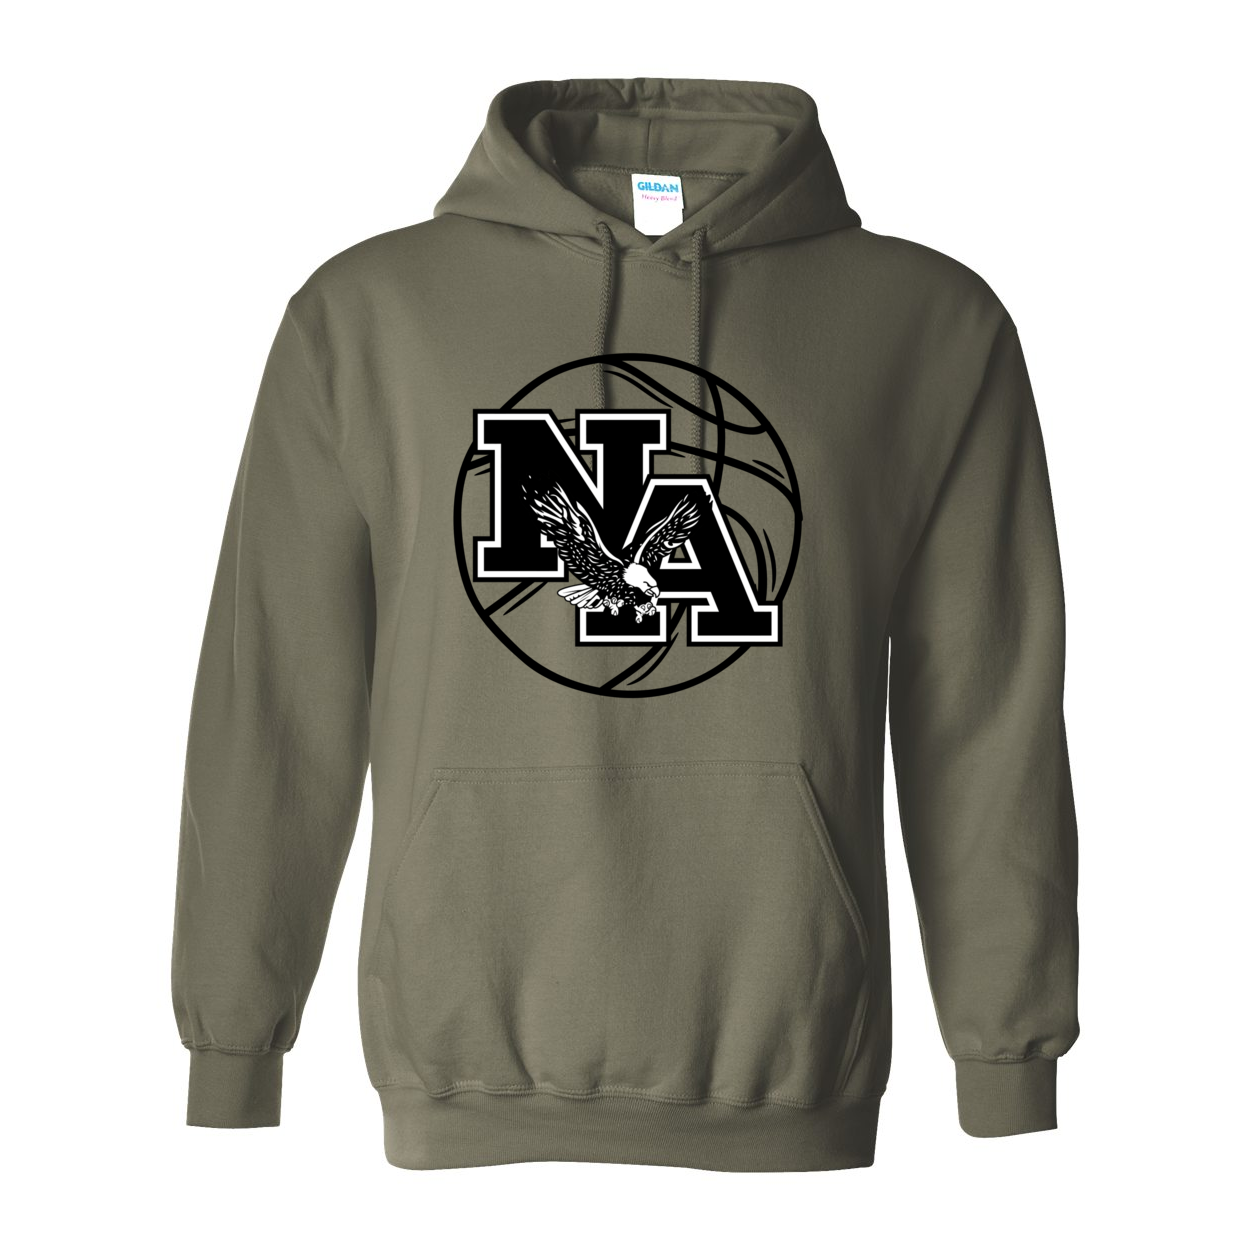 Adult Unisex Logo Basketball Graphic Hoodie - New Albany Eagles